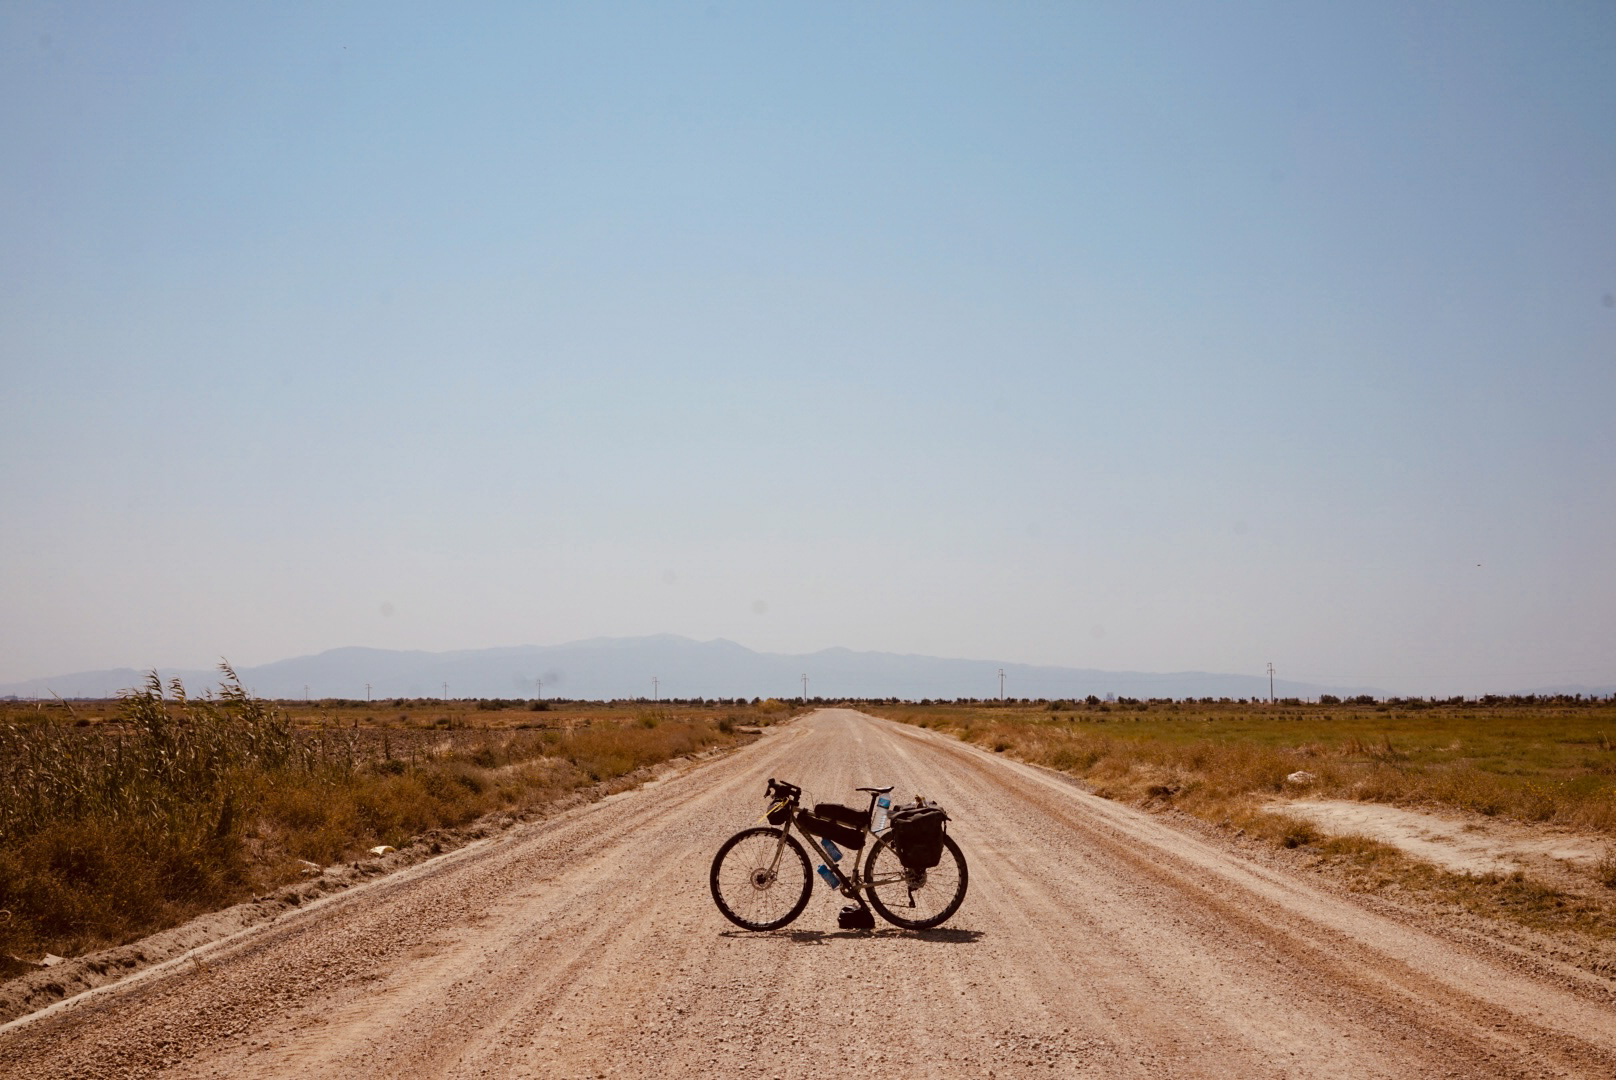 Mattia Lazzarin's bike stands in silhouette on a long gravel road stretching off to the horizon. 